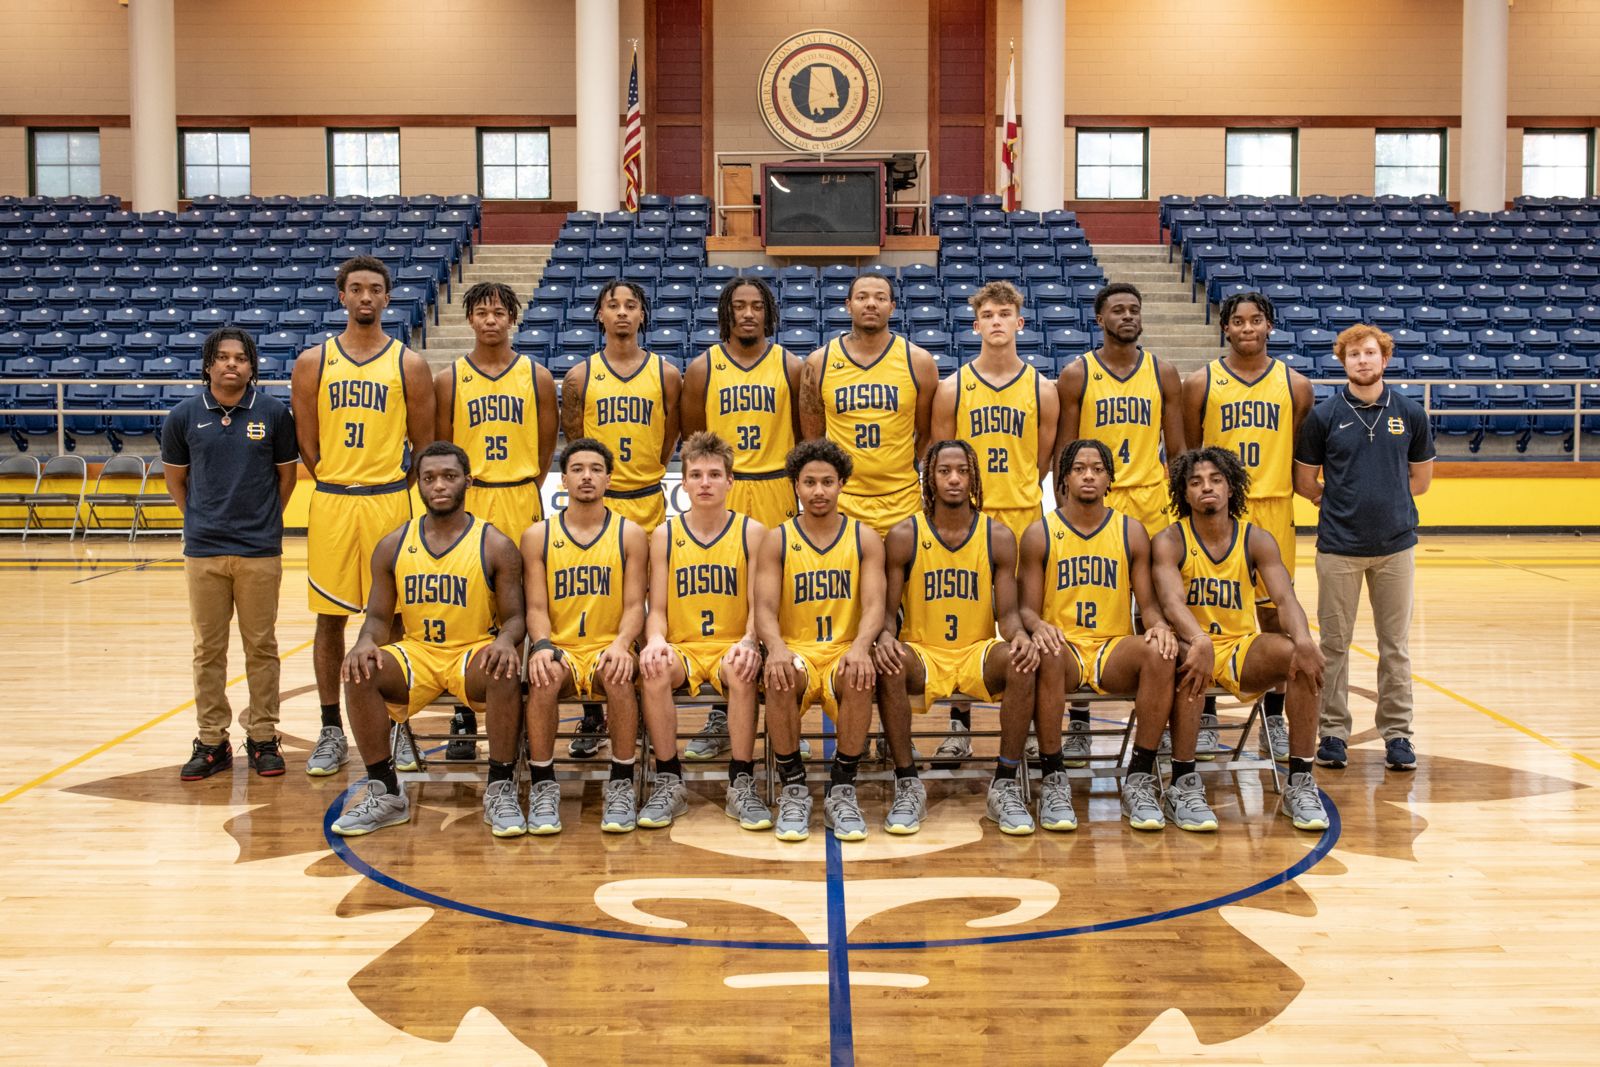 the suscc basketball team poses for a team photo